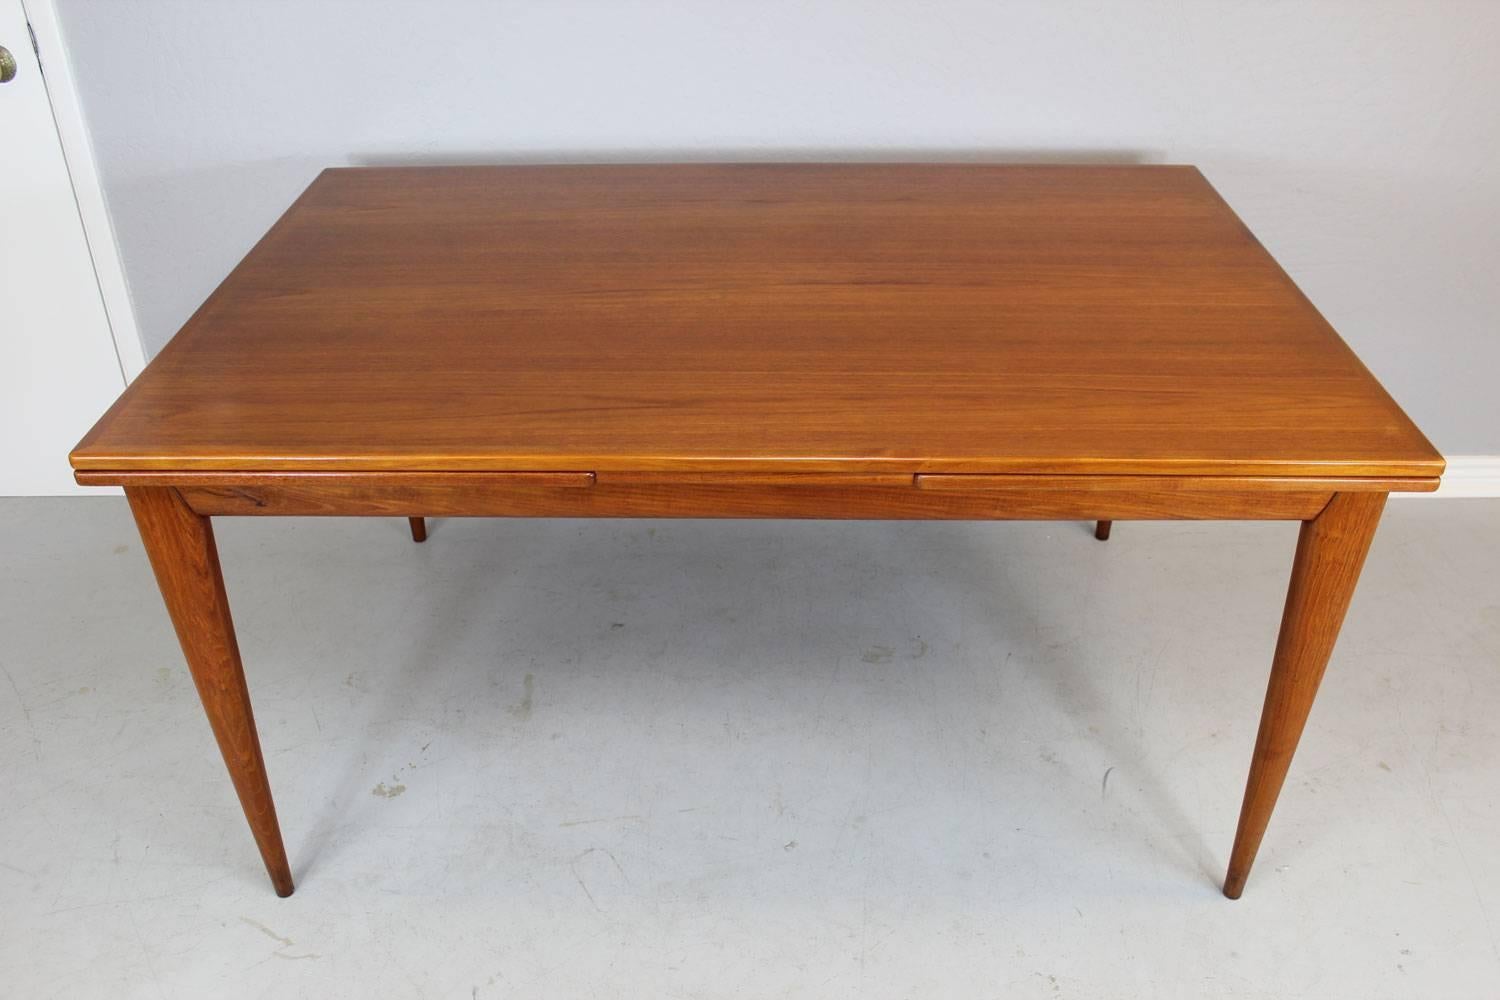 niels otto moller dining table